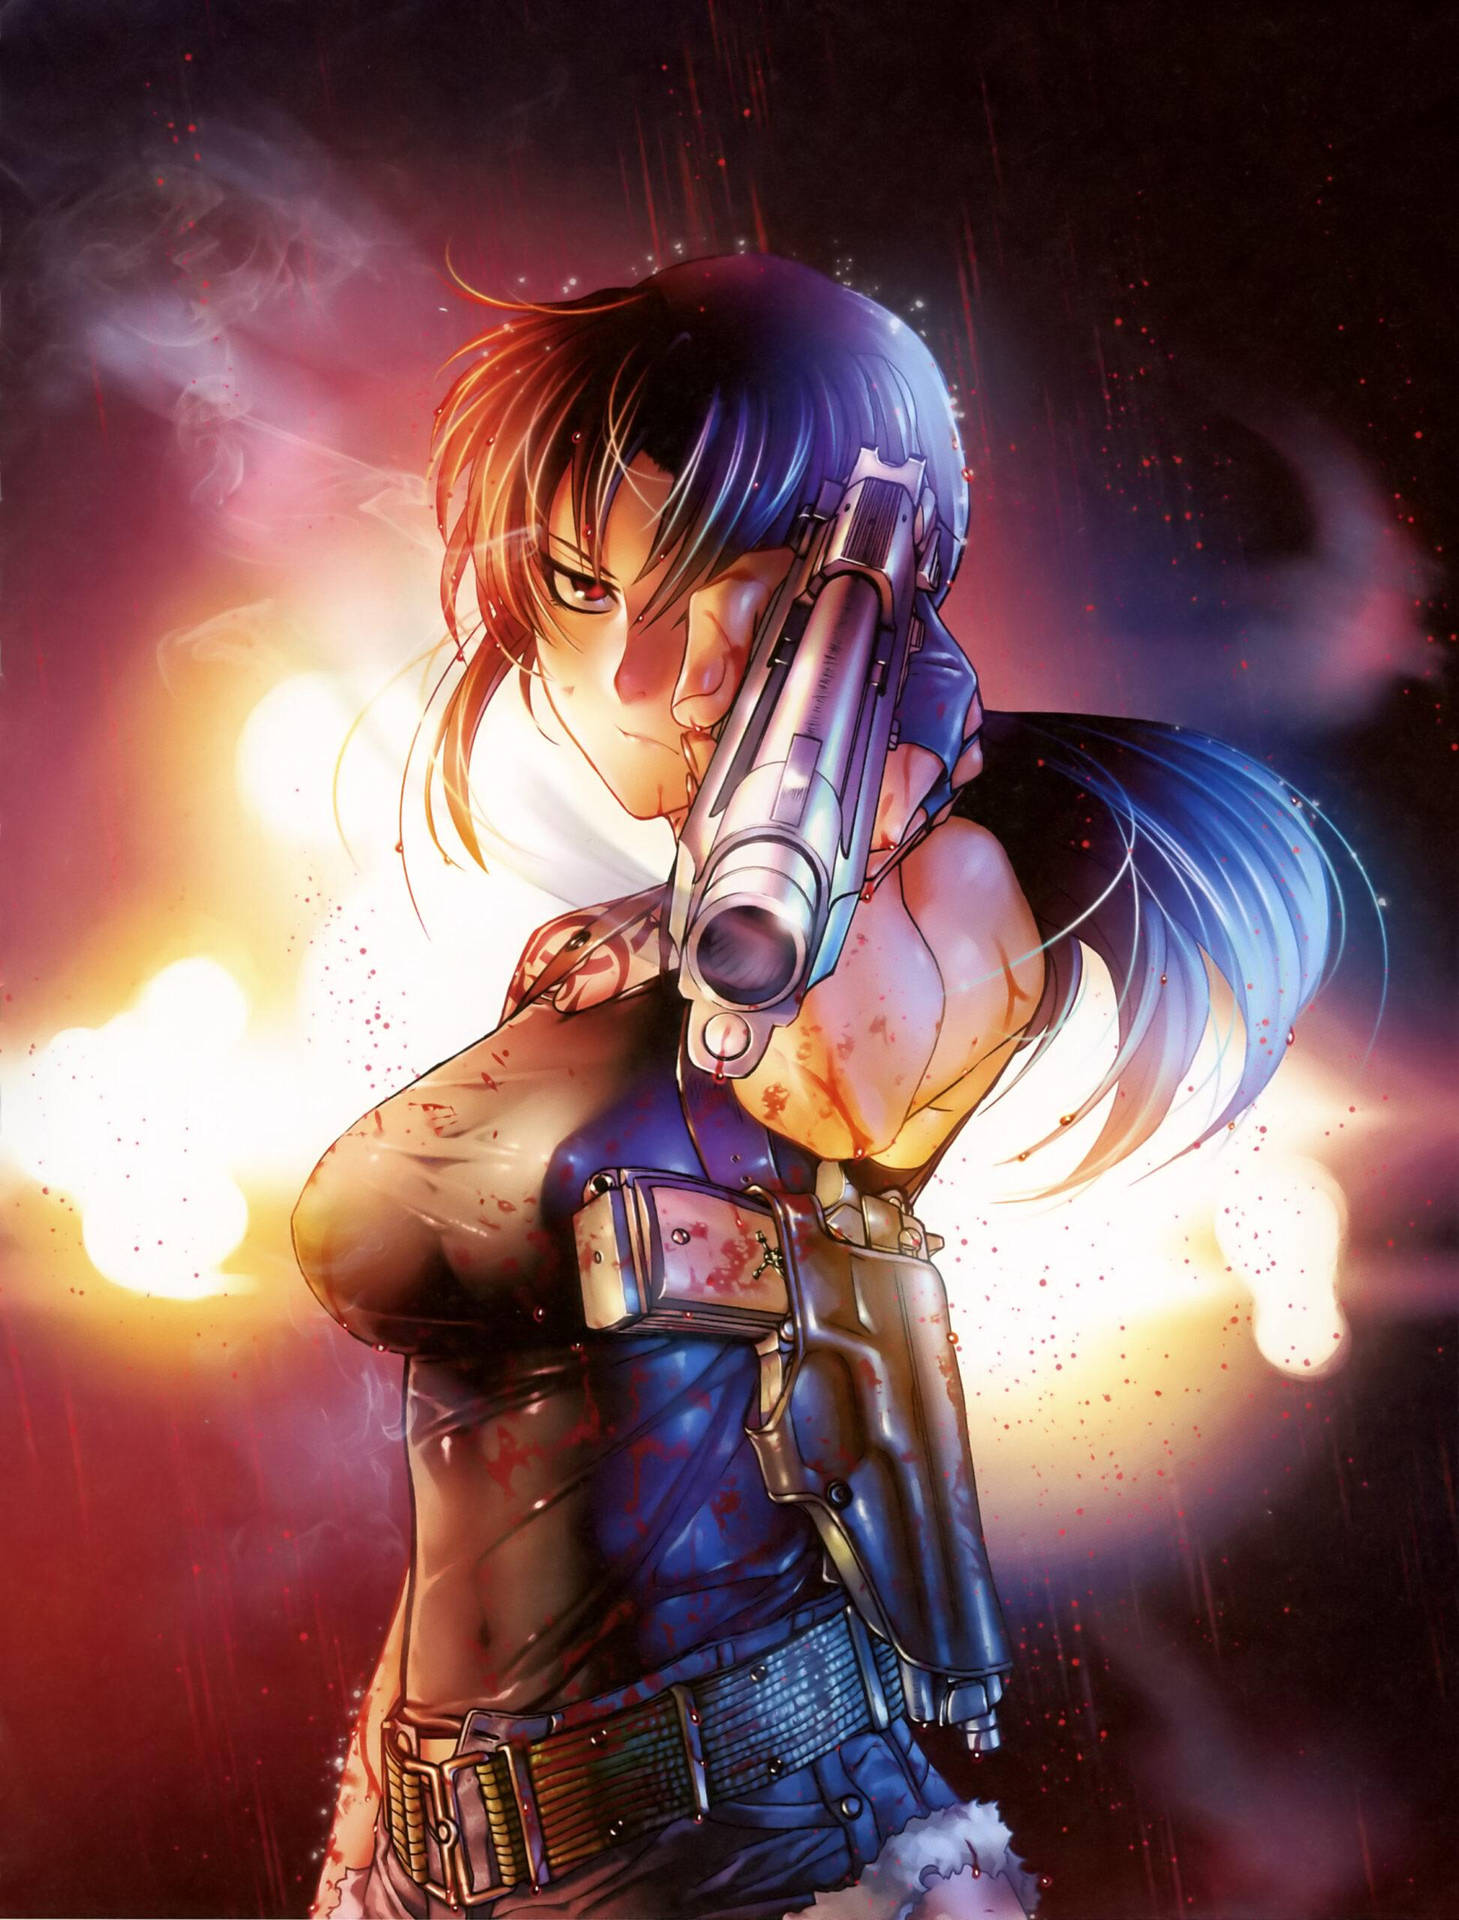 Who's this character? Tell me about her. : r/blacklagoon